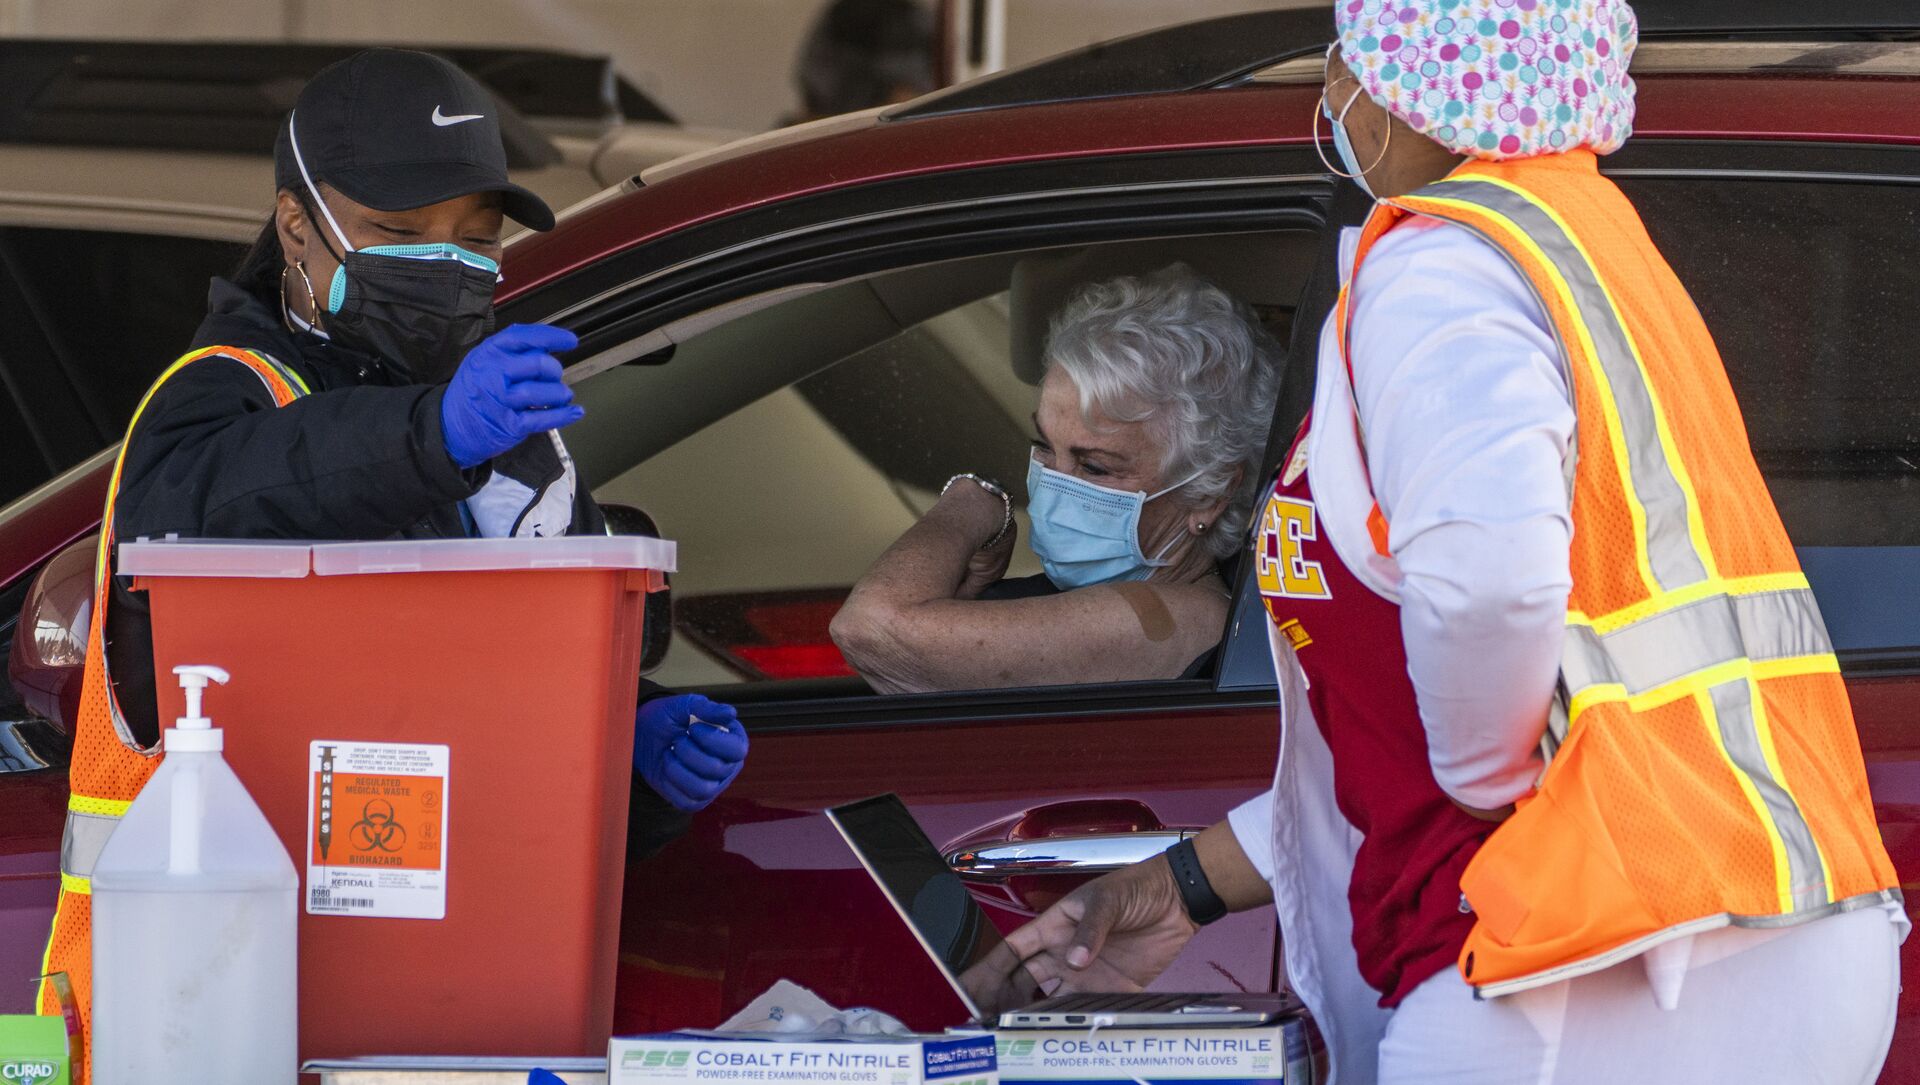 FILE - In this Jan. 26, 2021, file photo, a woman is vaccinated inside her vehicle at a mass COVID-19 vaccination site outside The Forum in Inglewood, Calif. Several states are loosening their coronavirus restrictions on restaurants and other businesses because of improved infection and hospitalization numbers but are moving cautiously, in part because of the more contagious variant taking hold in the U.S. - Sputnik International, 1920, 28.03.2021